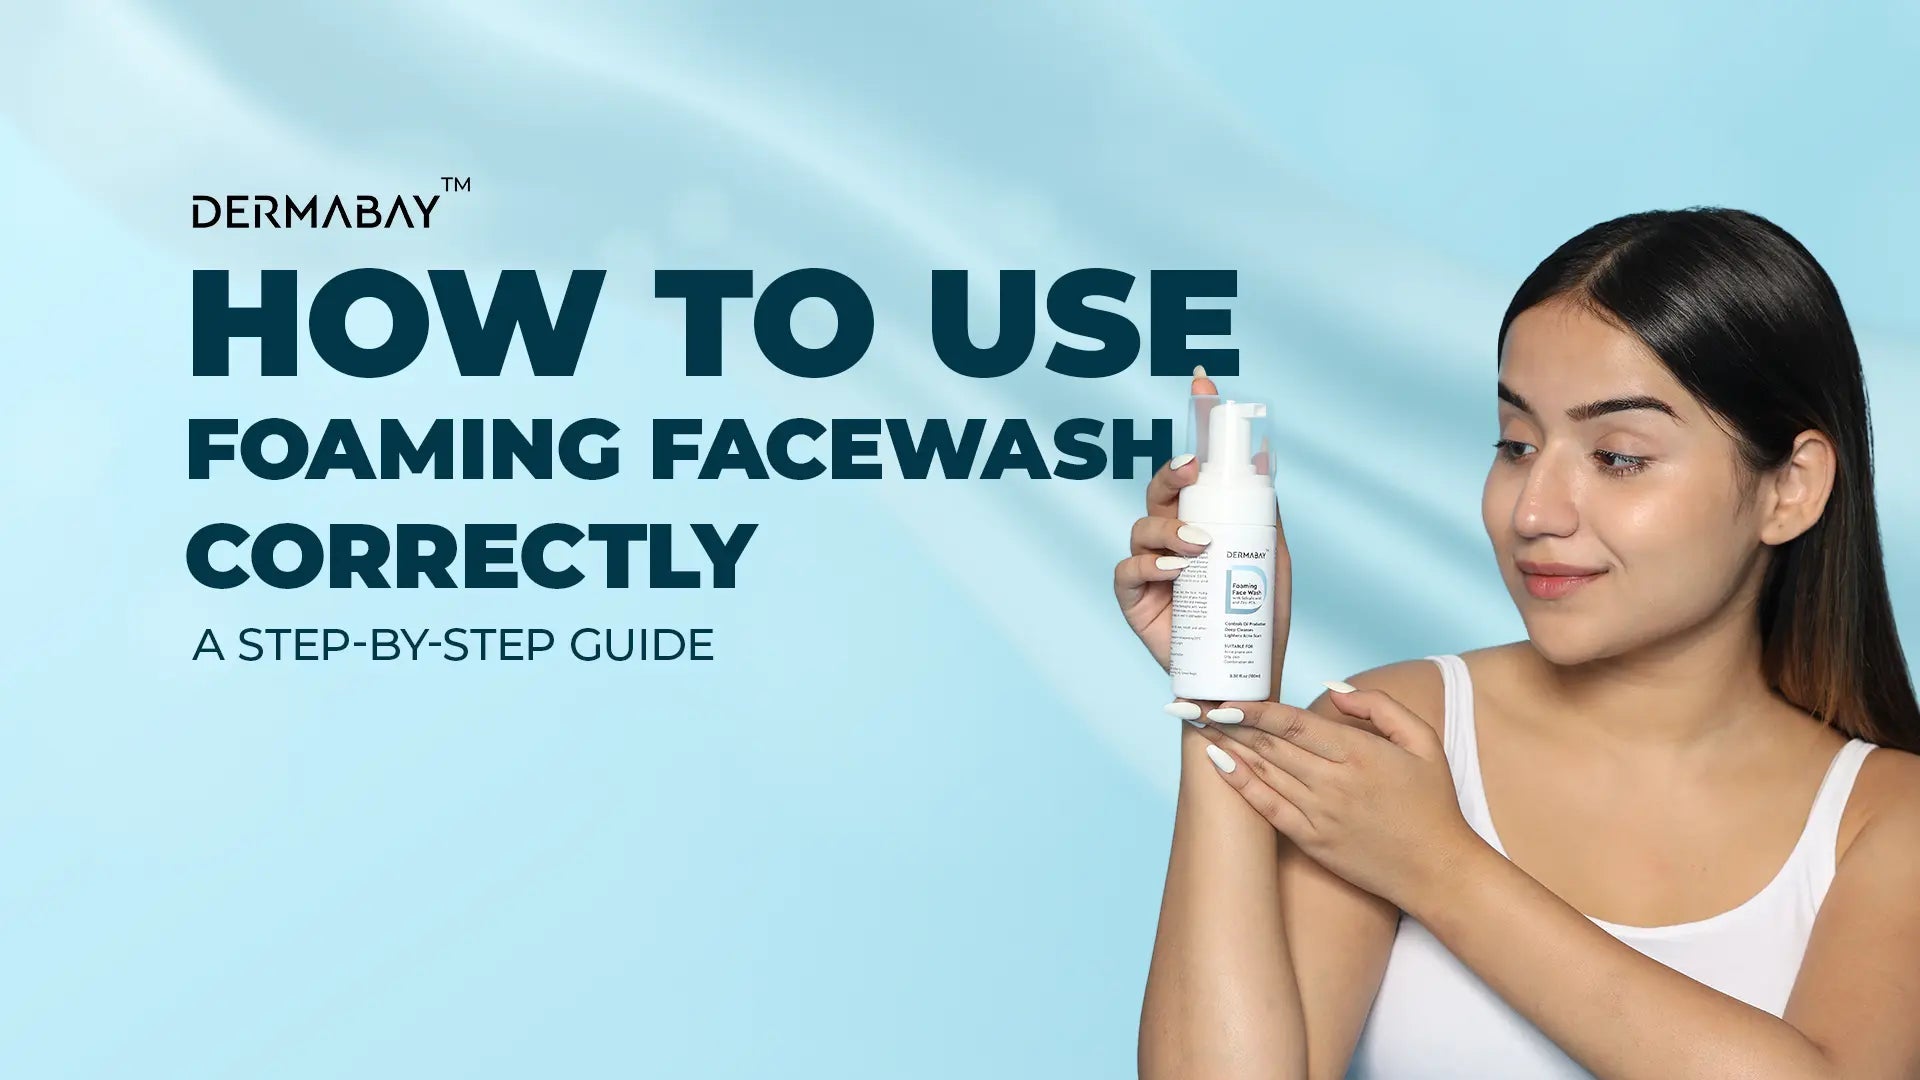 How to Use Foaming Facewash Correctly: A Step-by-Step Guide - Dermabay